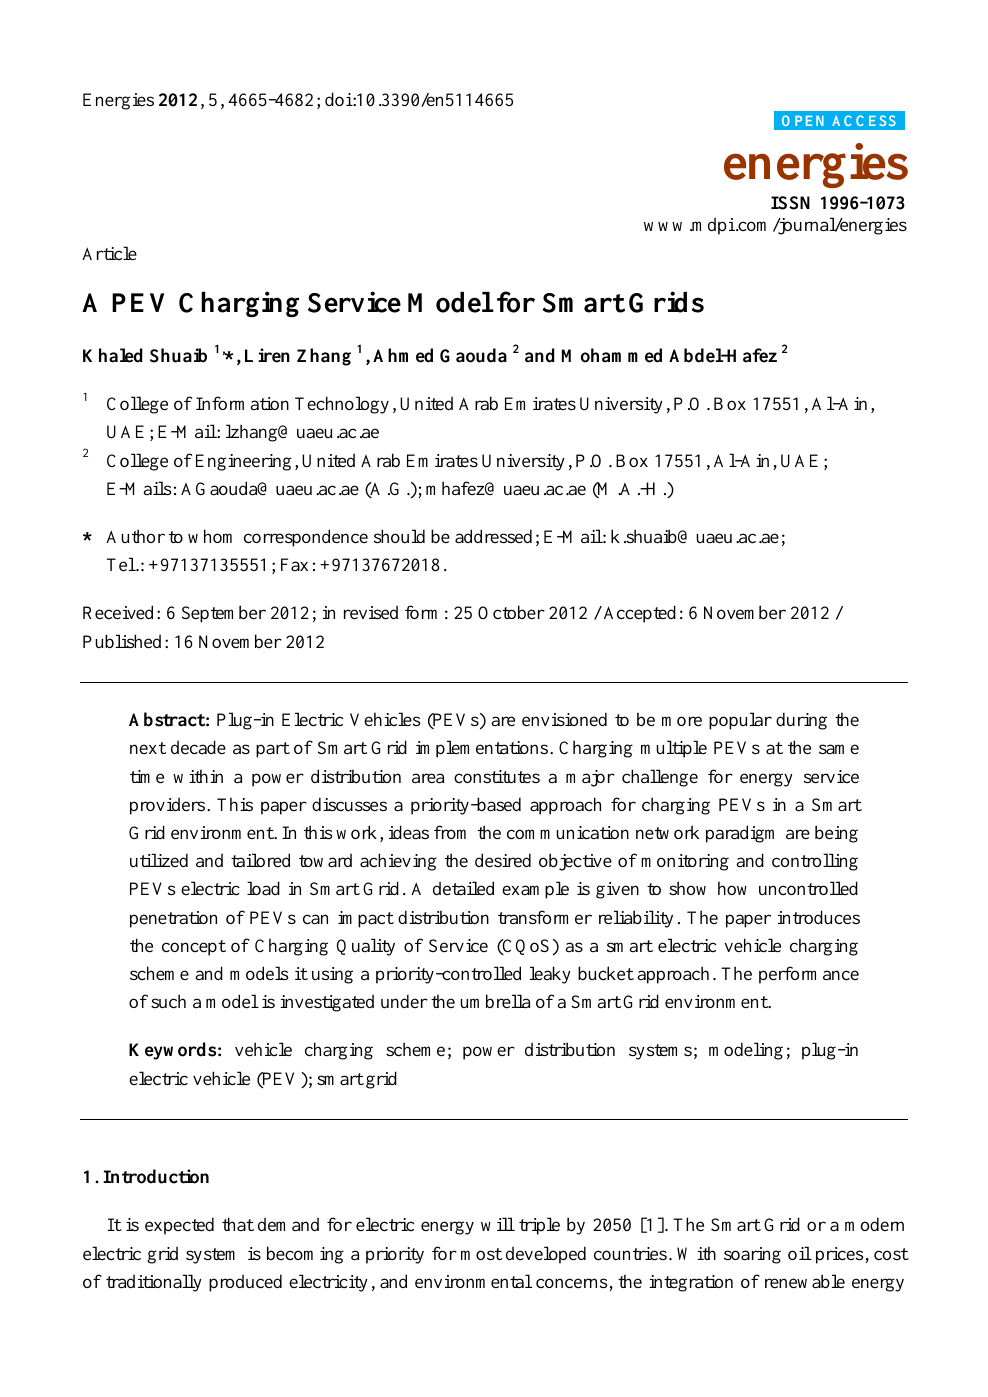 A Pev Charging Service Model For Smart Grids Topic Of Research Paper In Electrical Engineering Electronic Engineering Information Engineering Download Scholarly Article Pdf And Read For Free On Cyberleninka Open Science